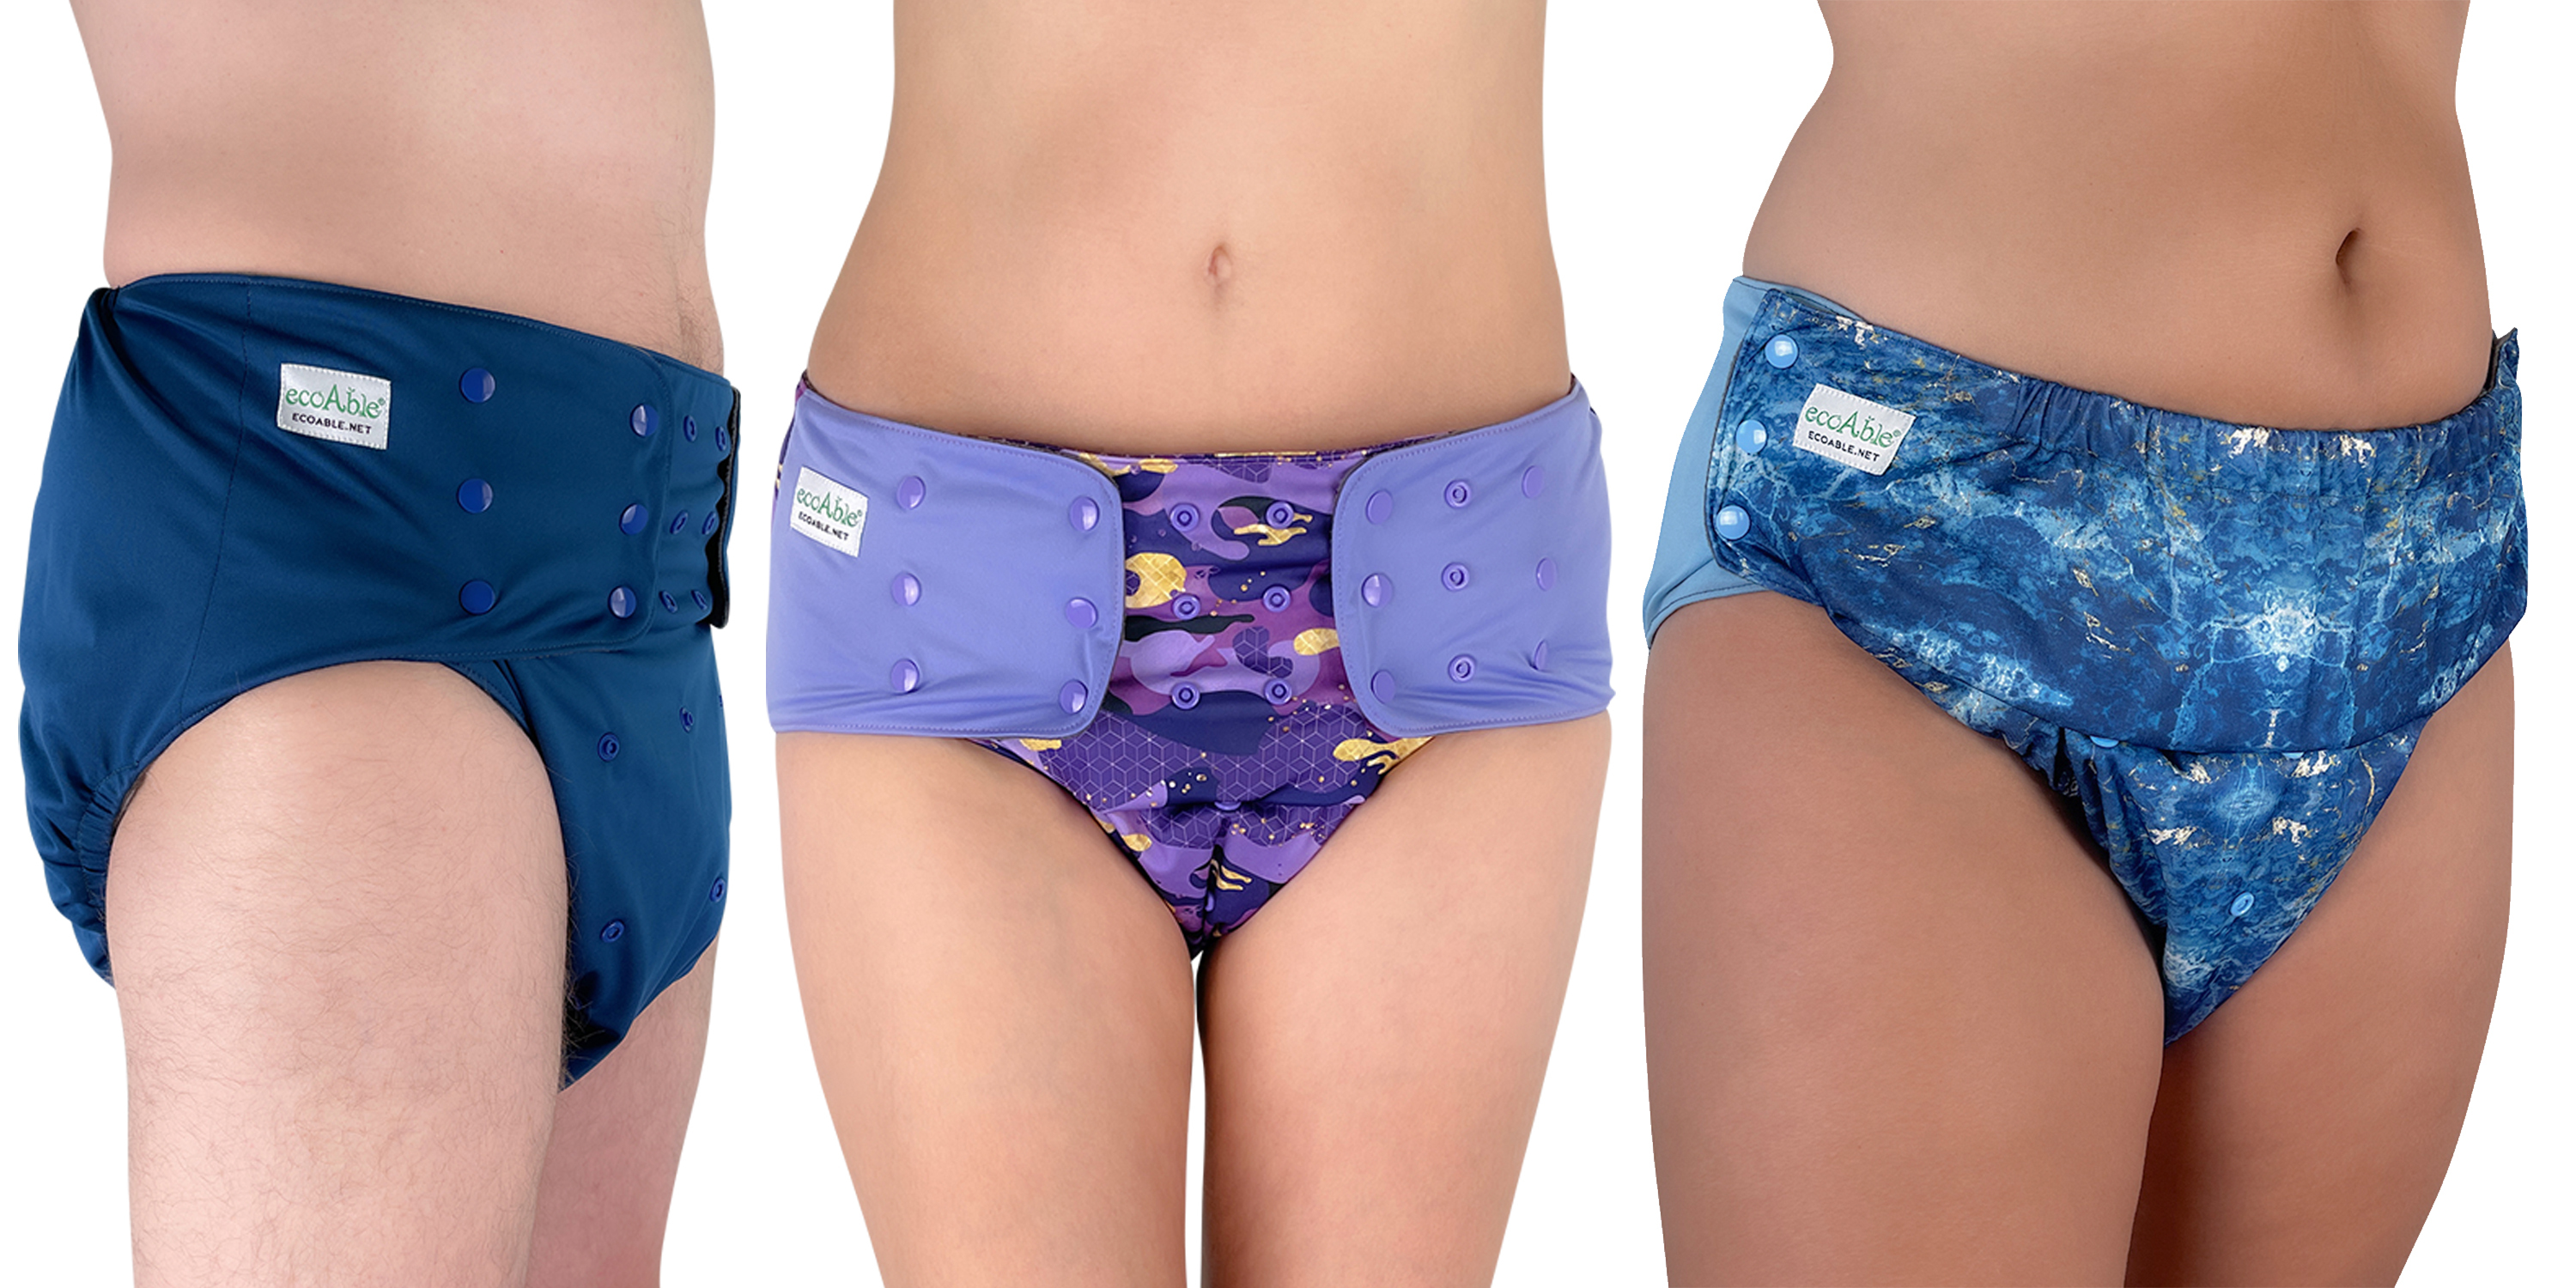 Reusable Cloth Diapers for Special Needs Adults - Incontinence, Bedwetting, Enuresis, Overactive Bladder, Autism